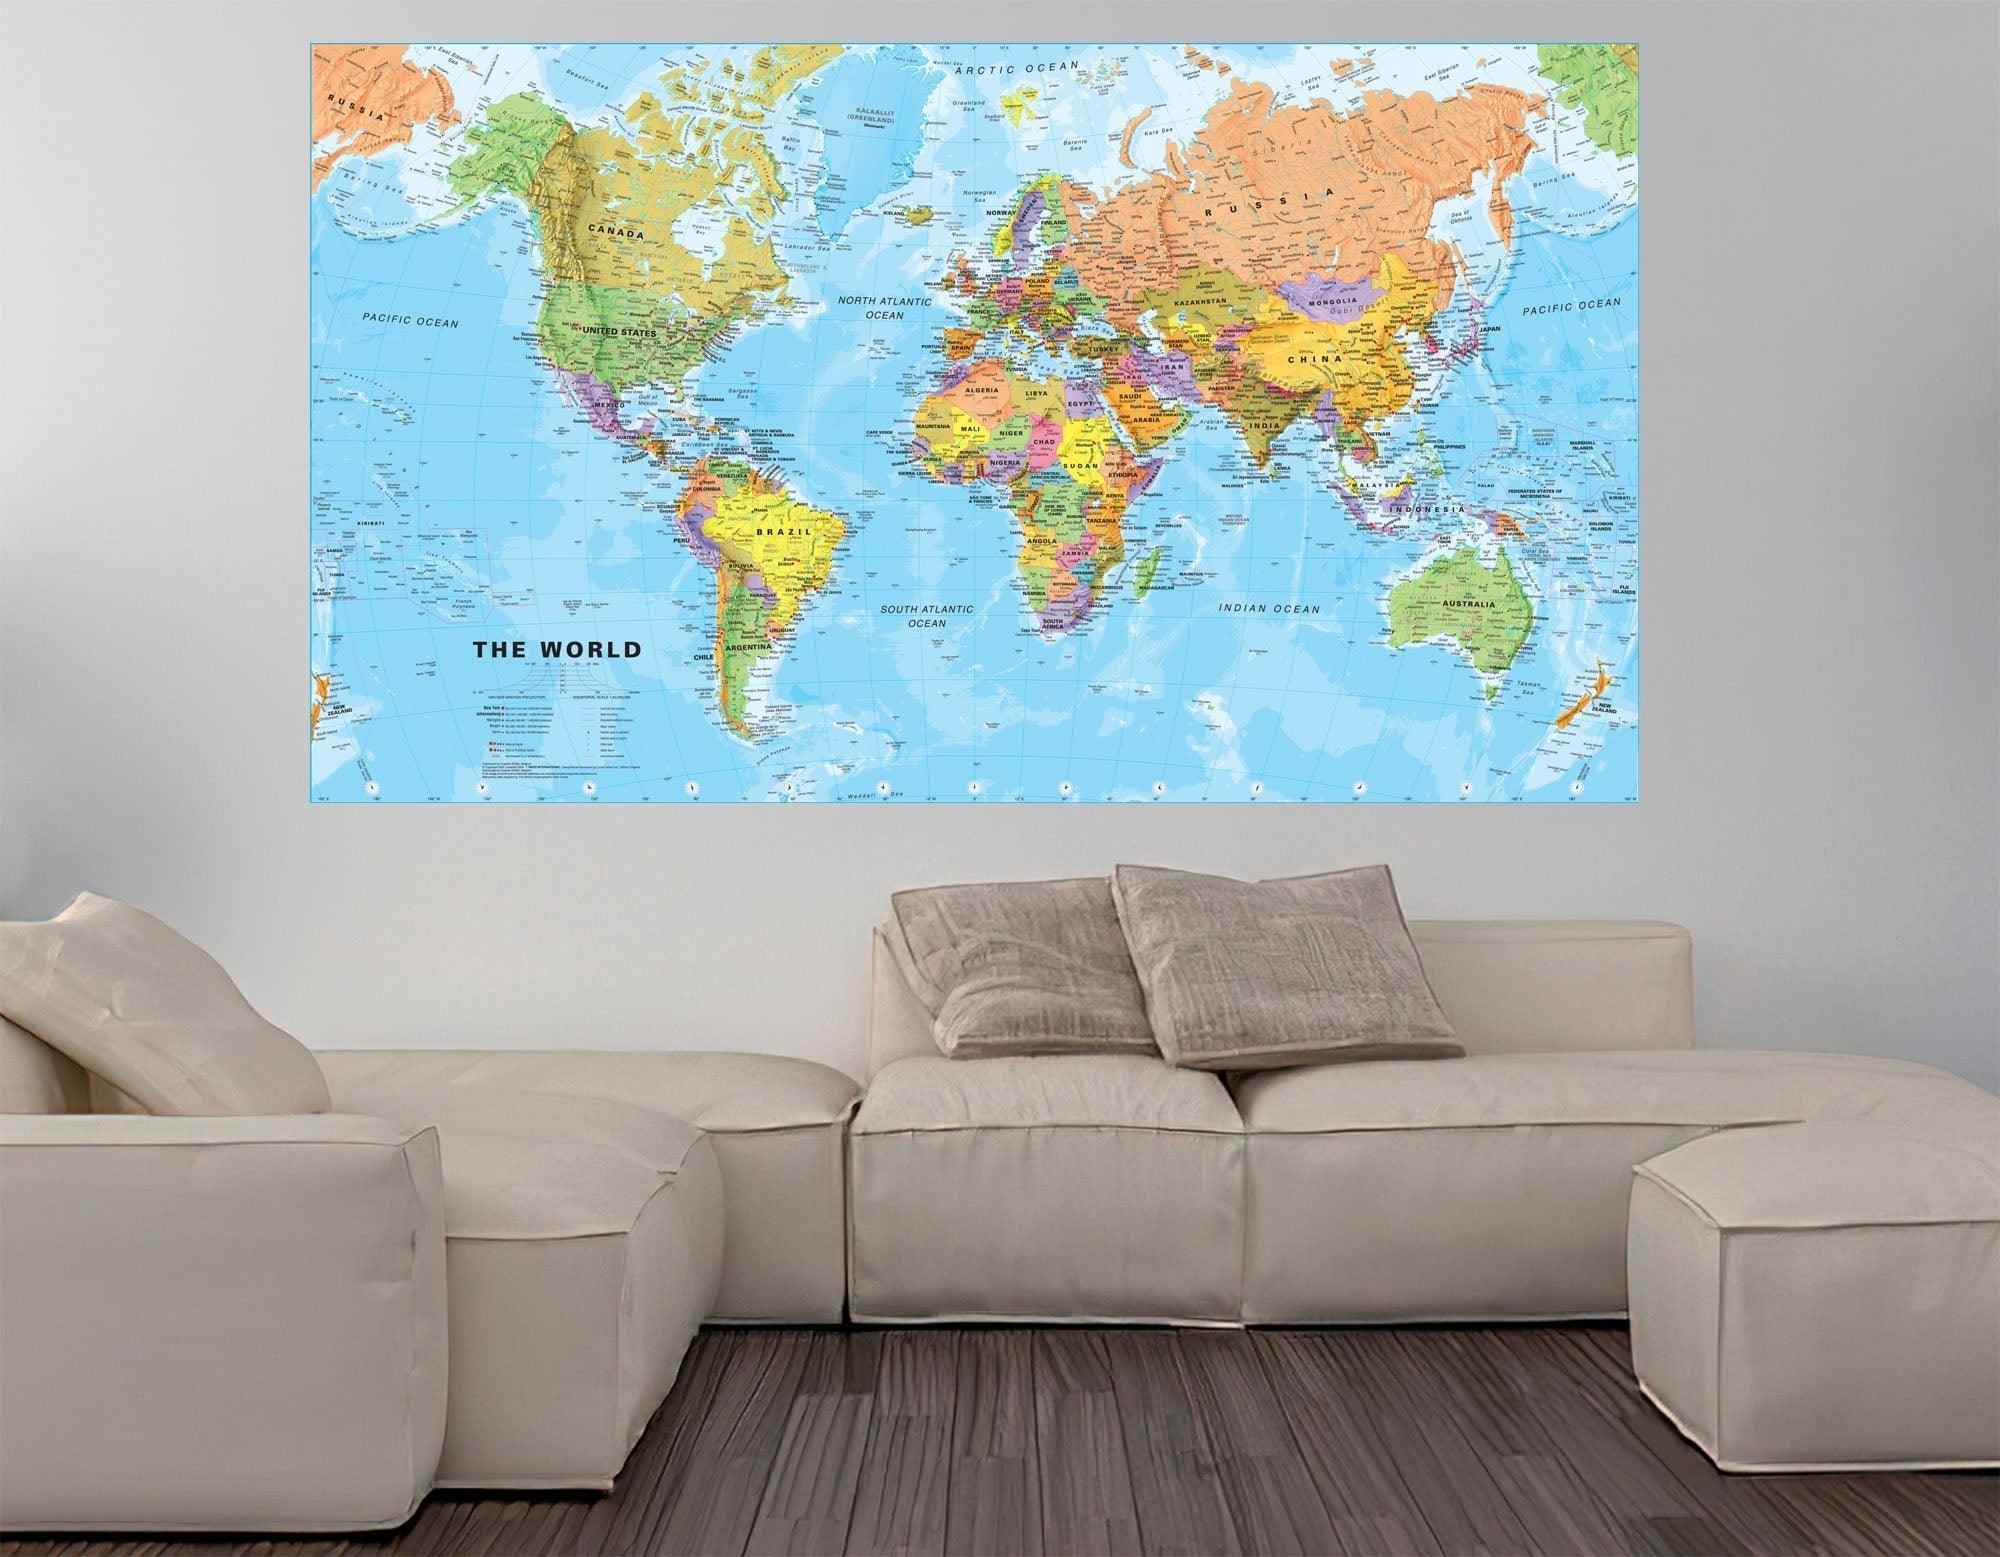 World Map Wall Decal Sticker Wallpaper, PEEL-N-STICK, removable anytime.